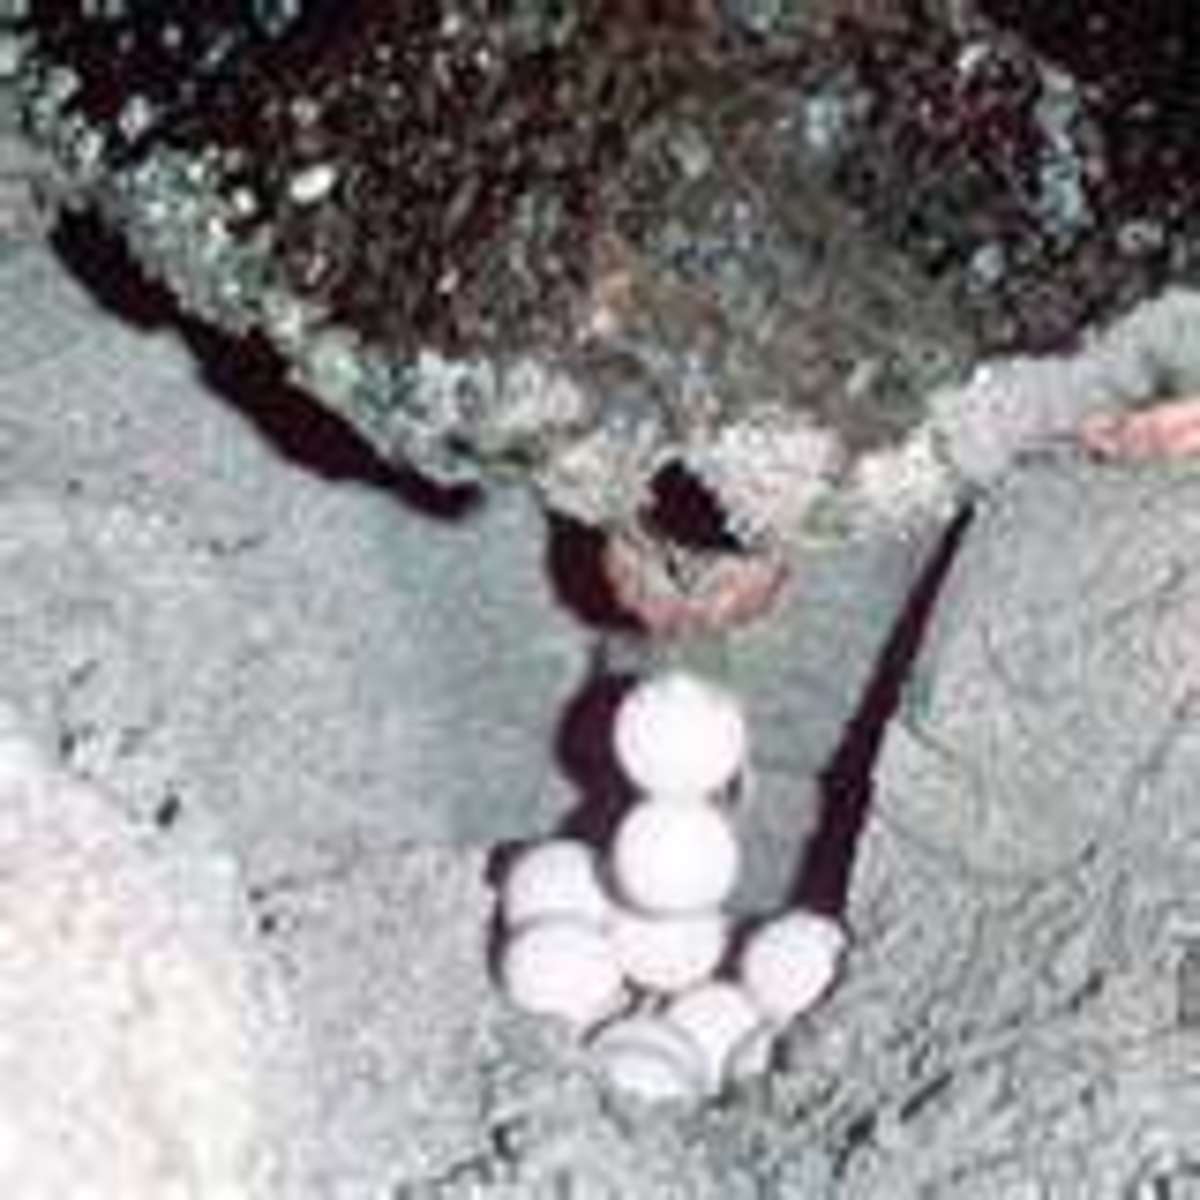 The Loggerhead has started to lay her eggs.  These eggs are protected, so please don't touch them.